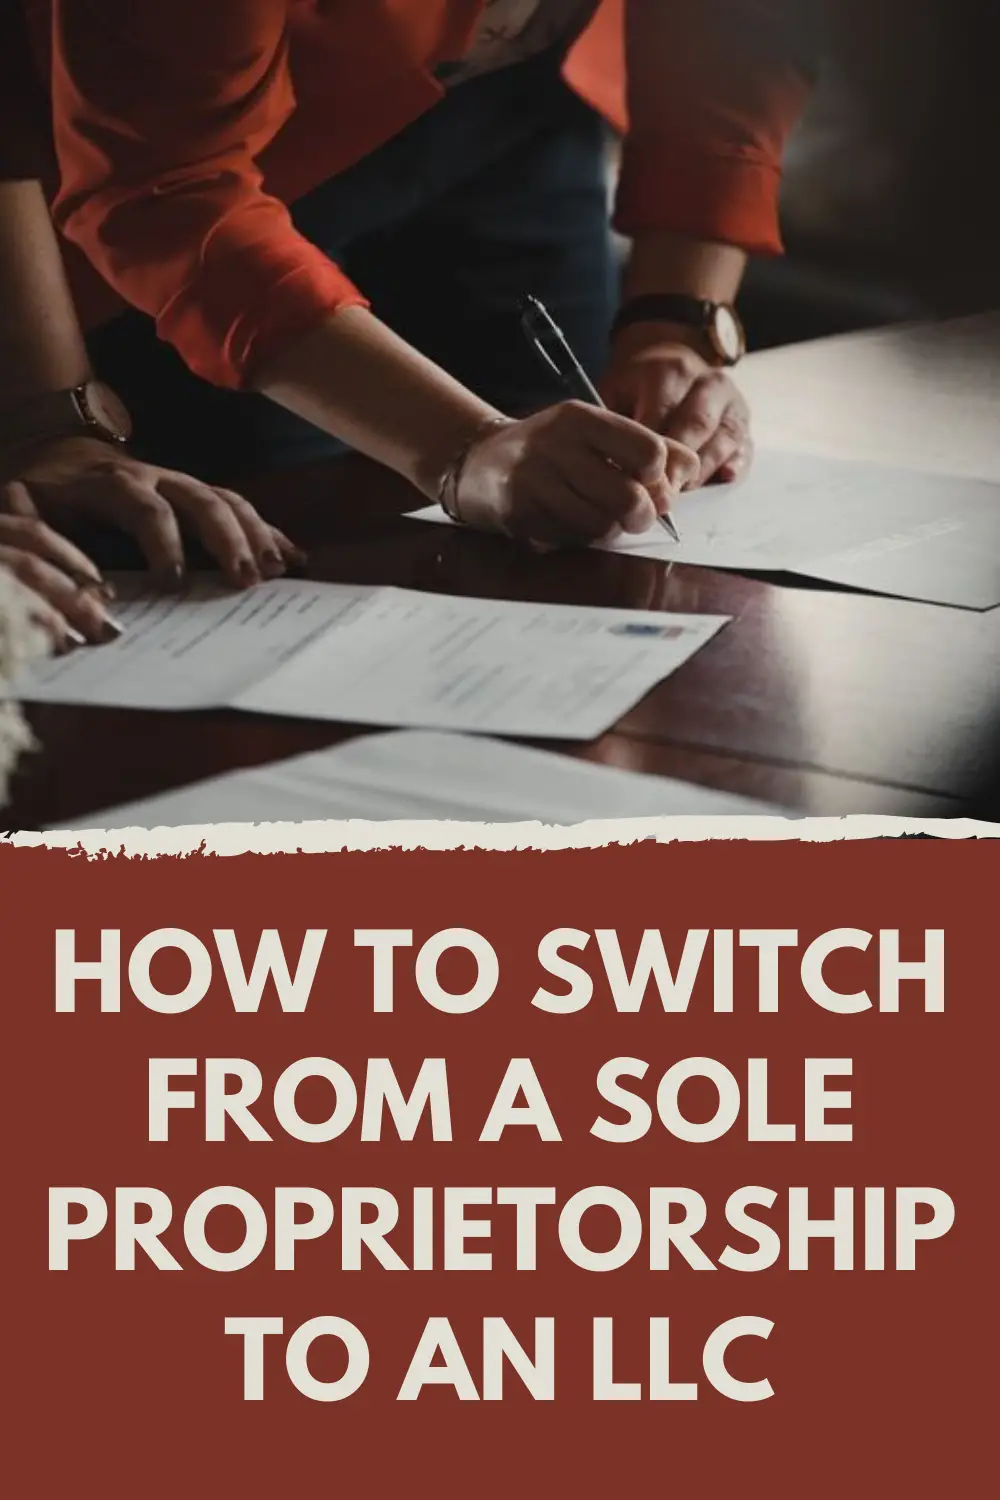 How to Switch from a Sole Proprietorship to an LLC